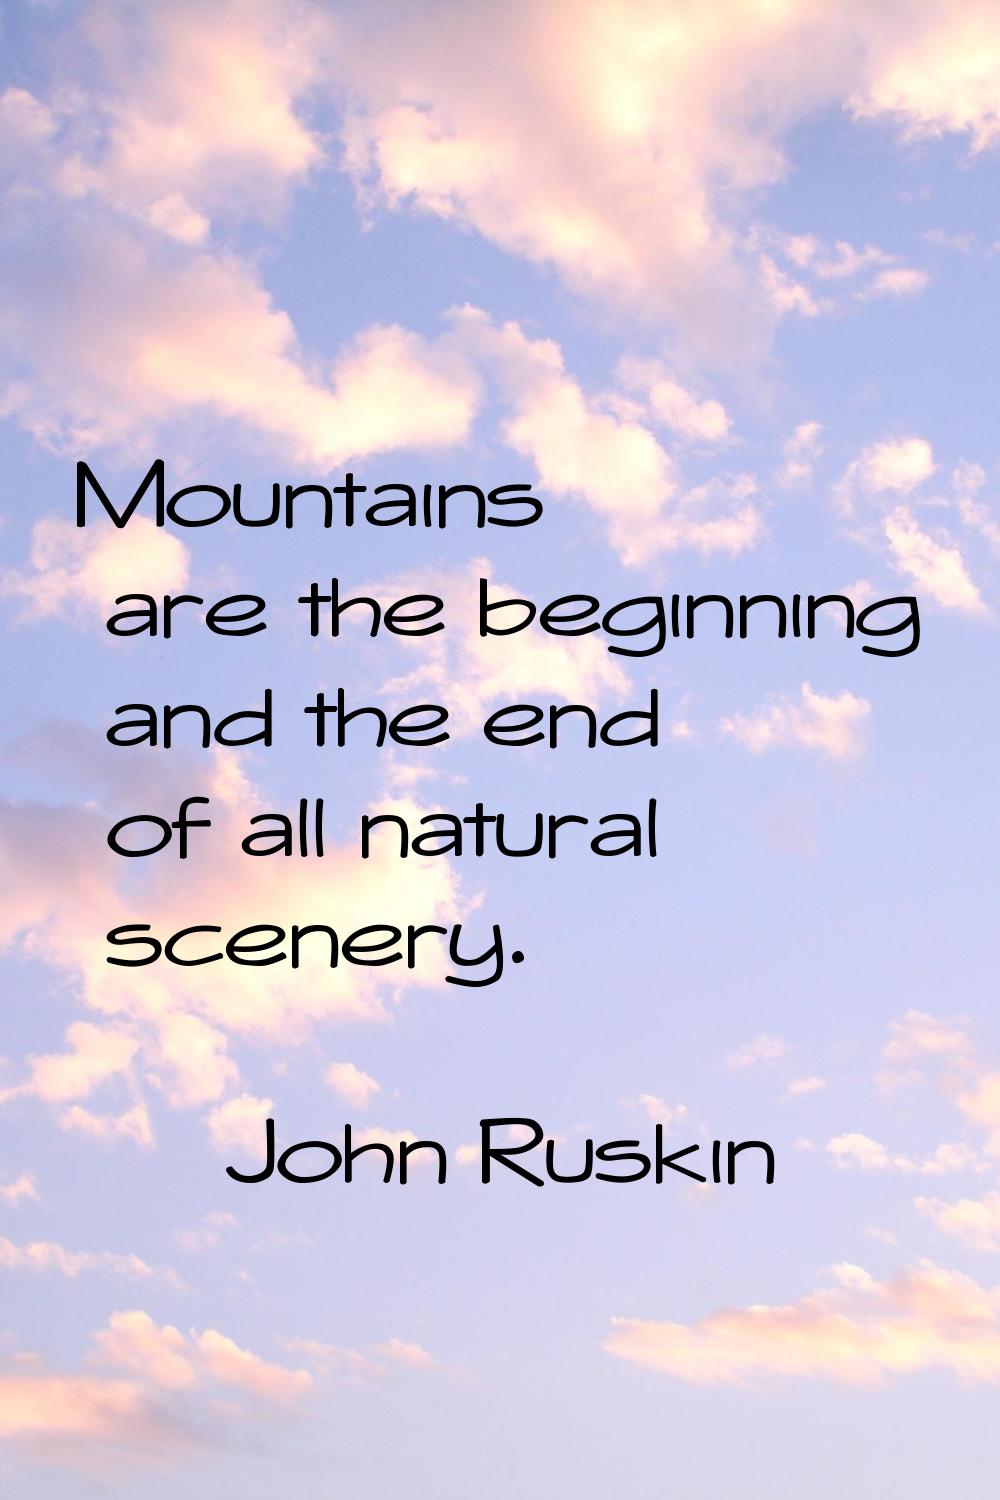 Mountains are the beginning and the end of all natural scenery.